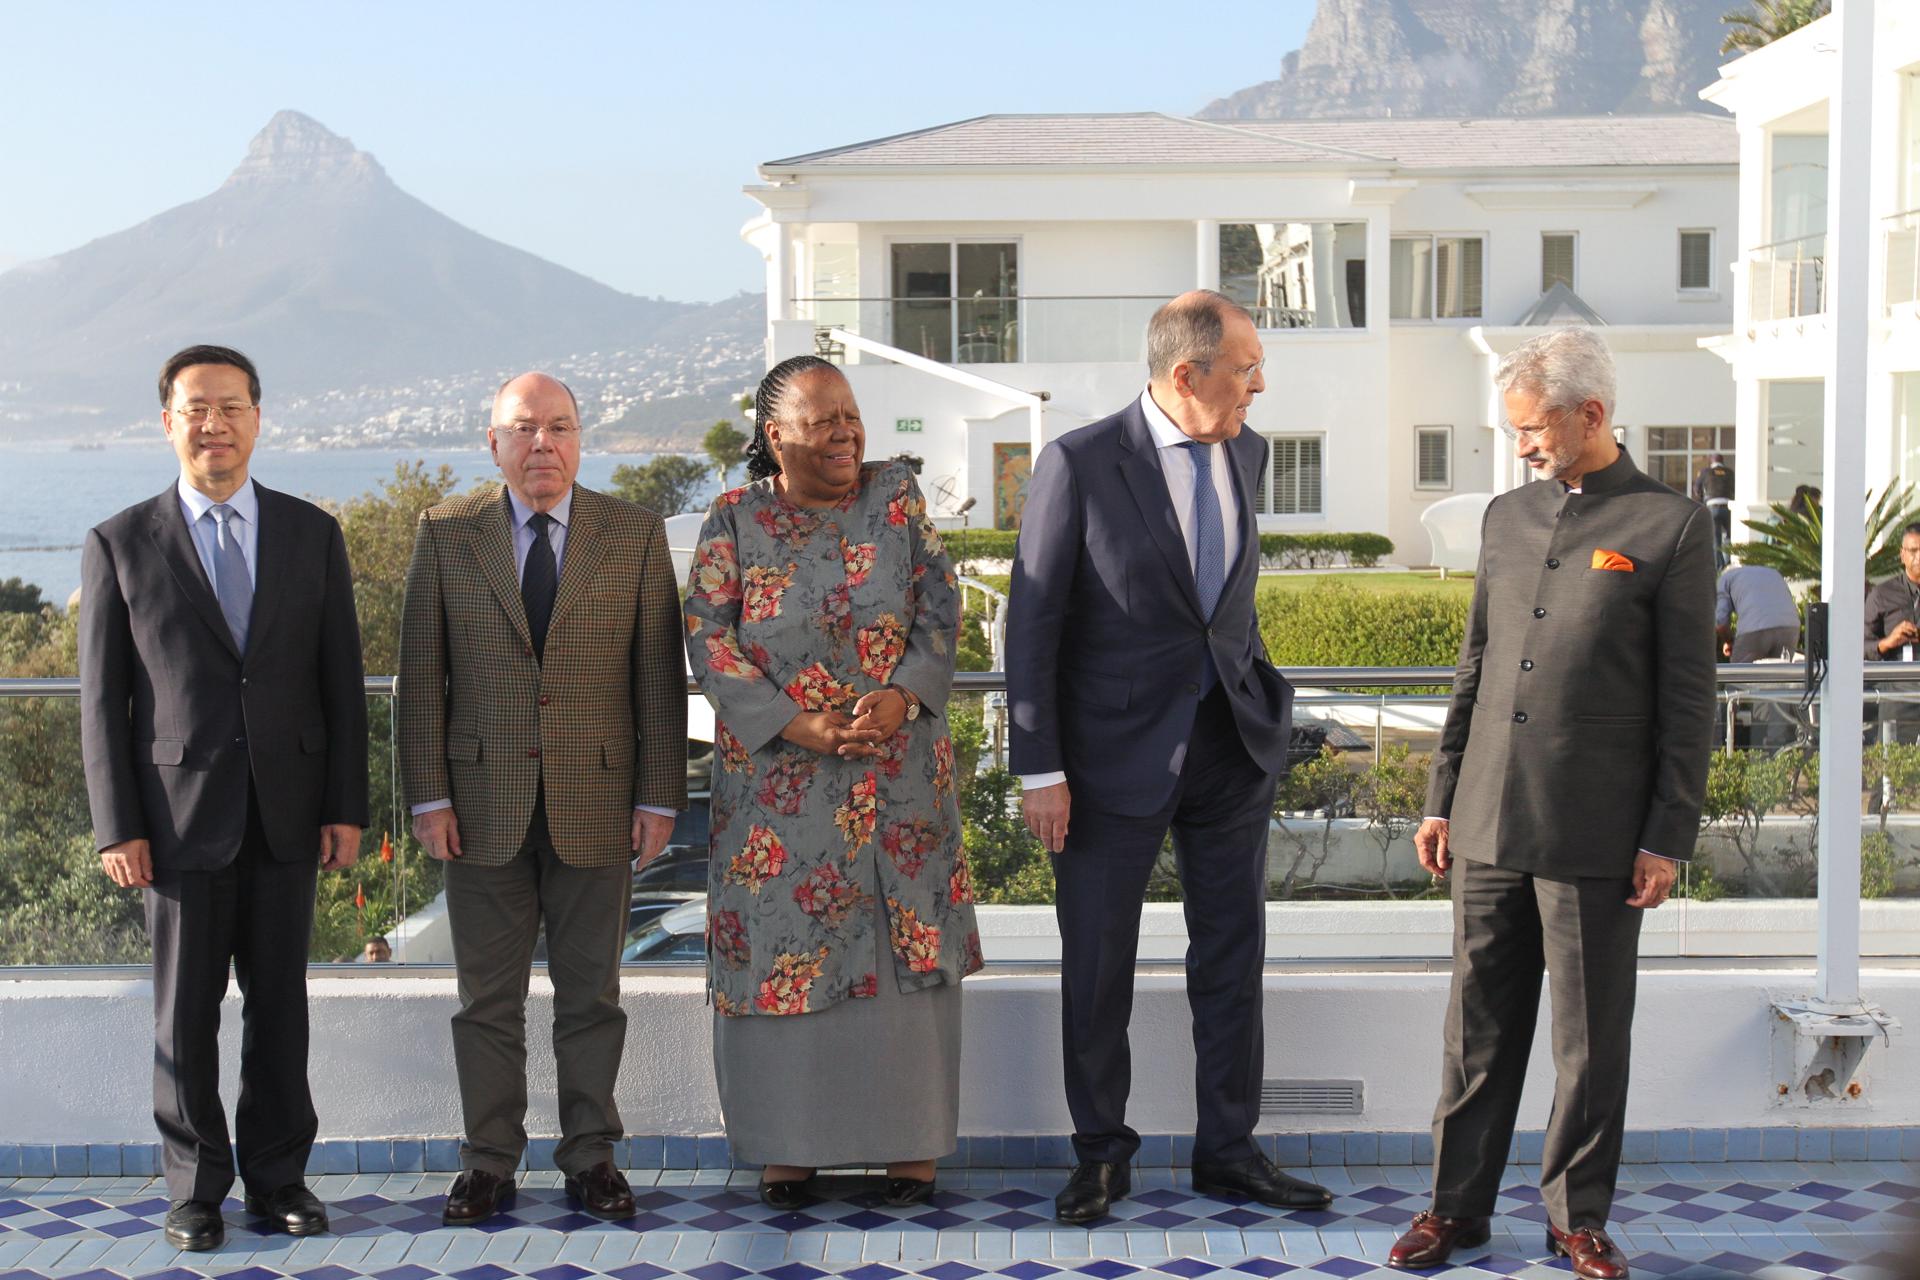 From left to right: Chinese Deputy Foreign Minister Ma Zhaoxu, Brazilian Foreign Minister Mauro Vieira, South African Minister of International Relations and Cooperation Naledi Pandor, Russian Foreign Minister Sergey Lavrov, and Indian Minister of External Affairs S Jaishankar pose for a photo during the BRICS ministerial meeting in Cape Town, South Africa, on 1 June 2023. EFE/EPA/HALDEN KROG